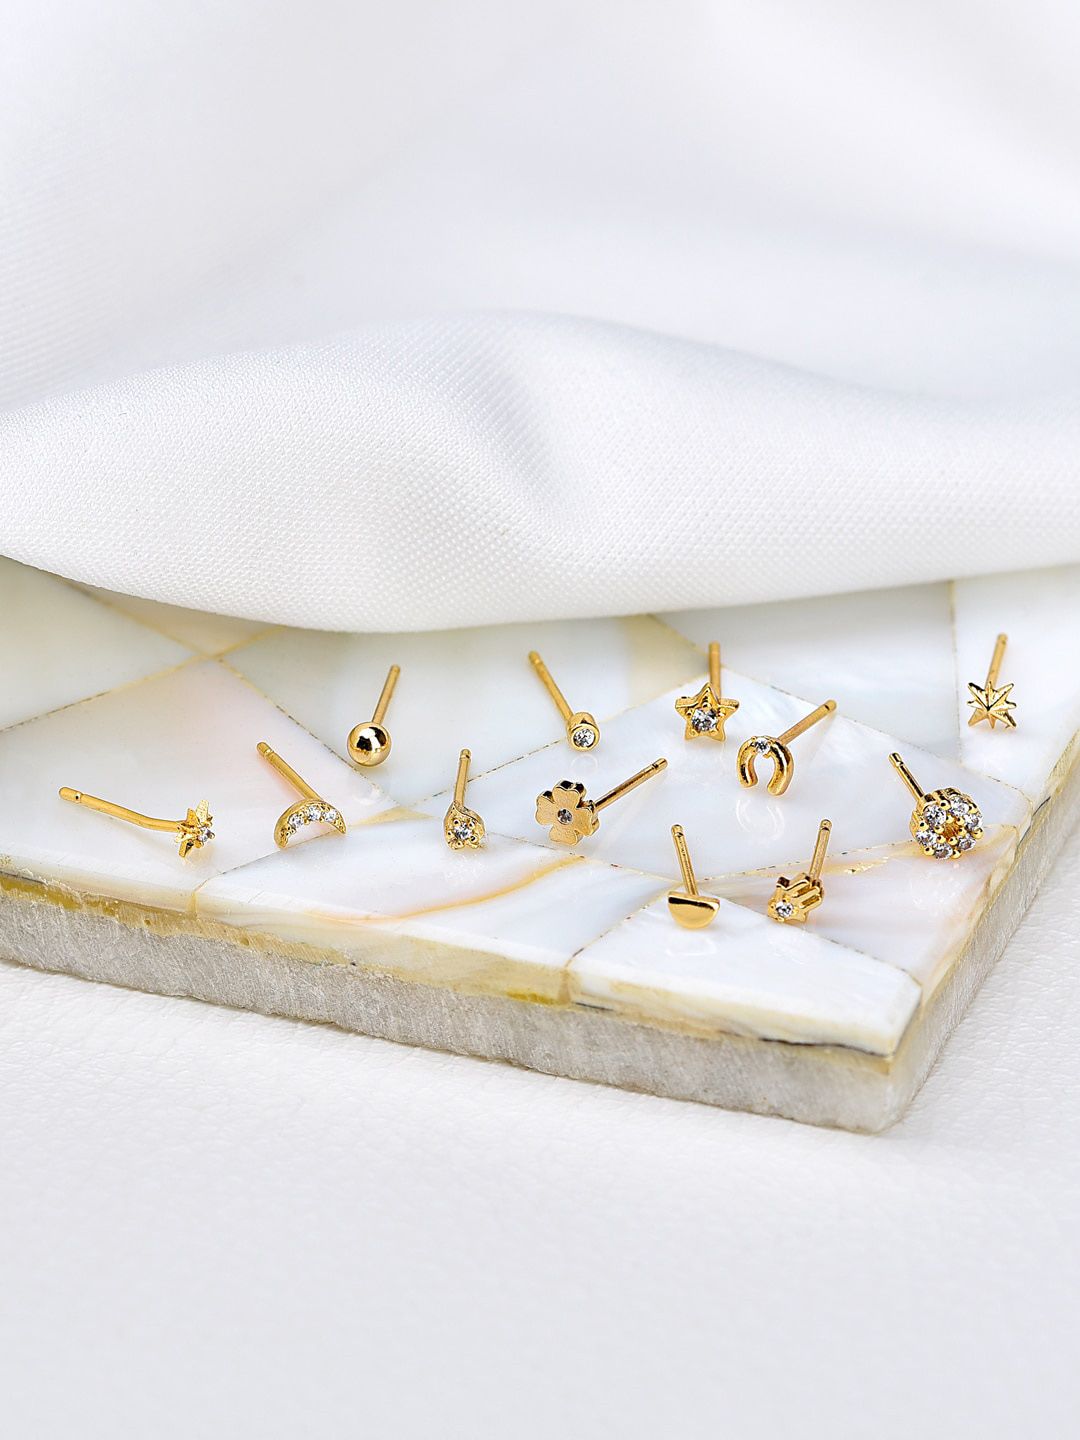 Accessorize Gold-Toned Star Shaped Studs Earrings Set of 6 Price in India